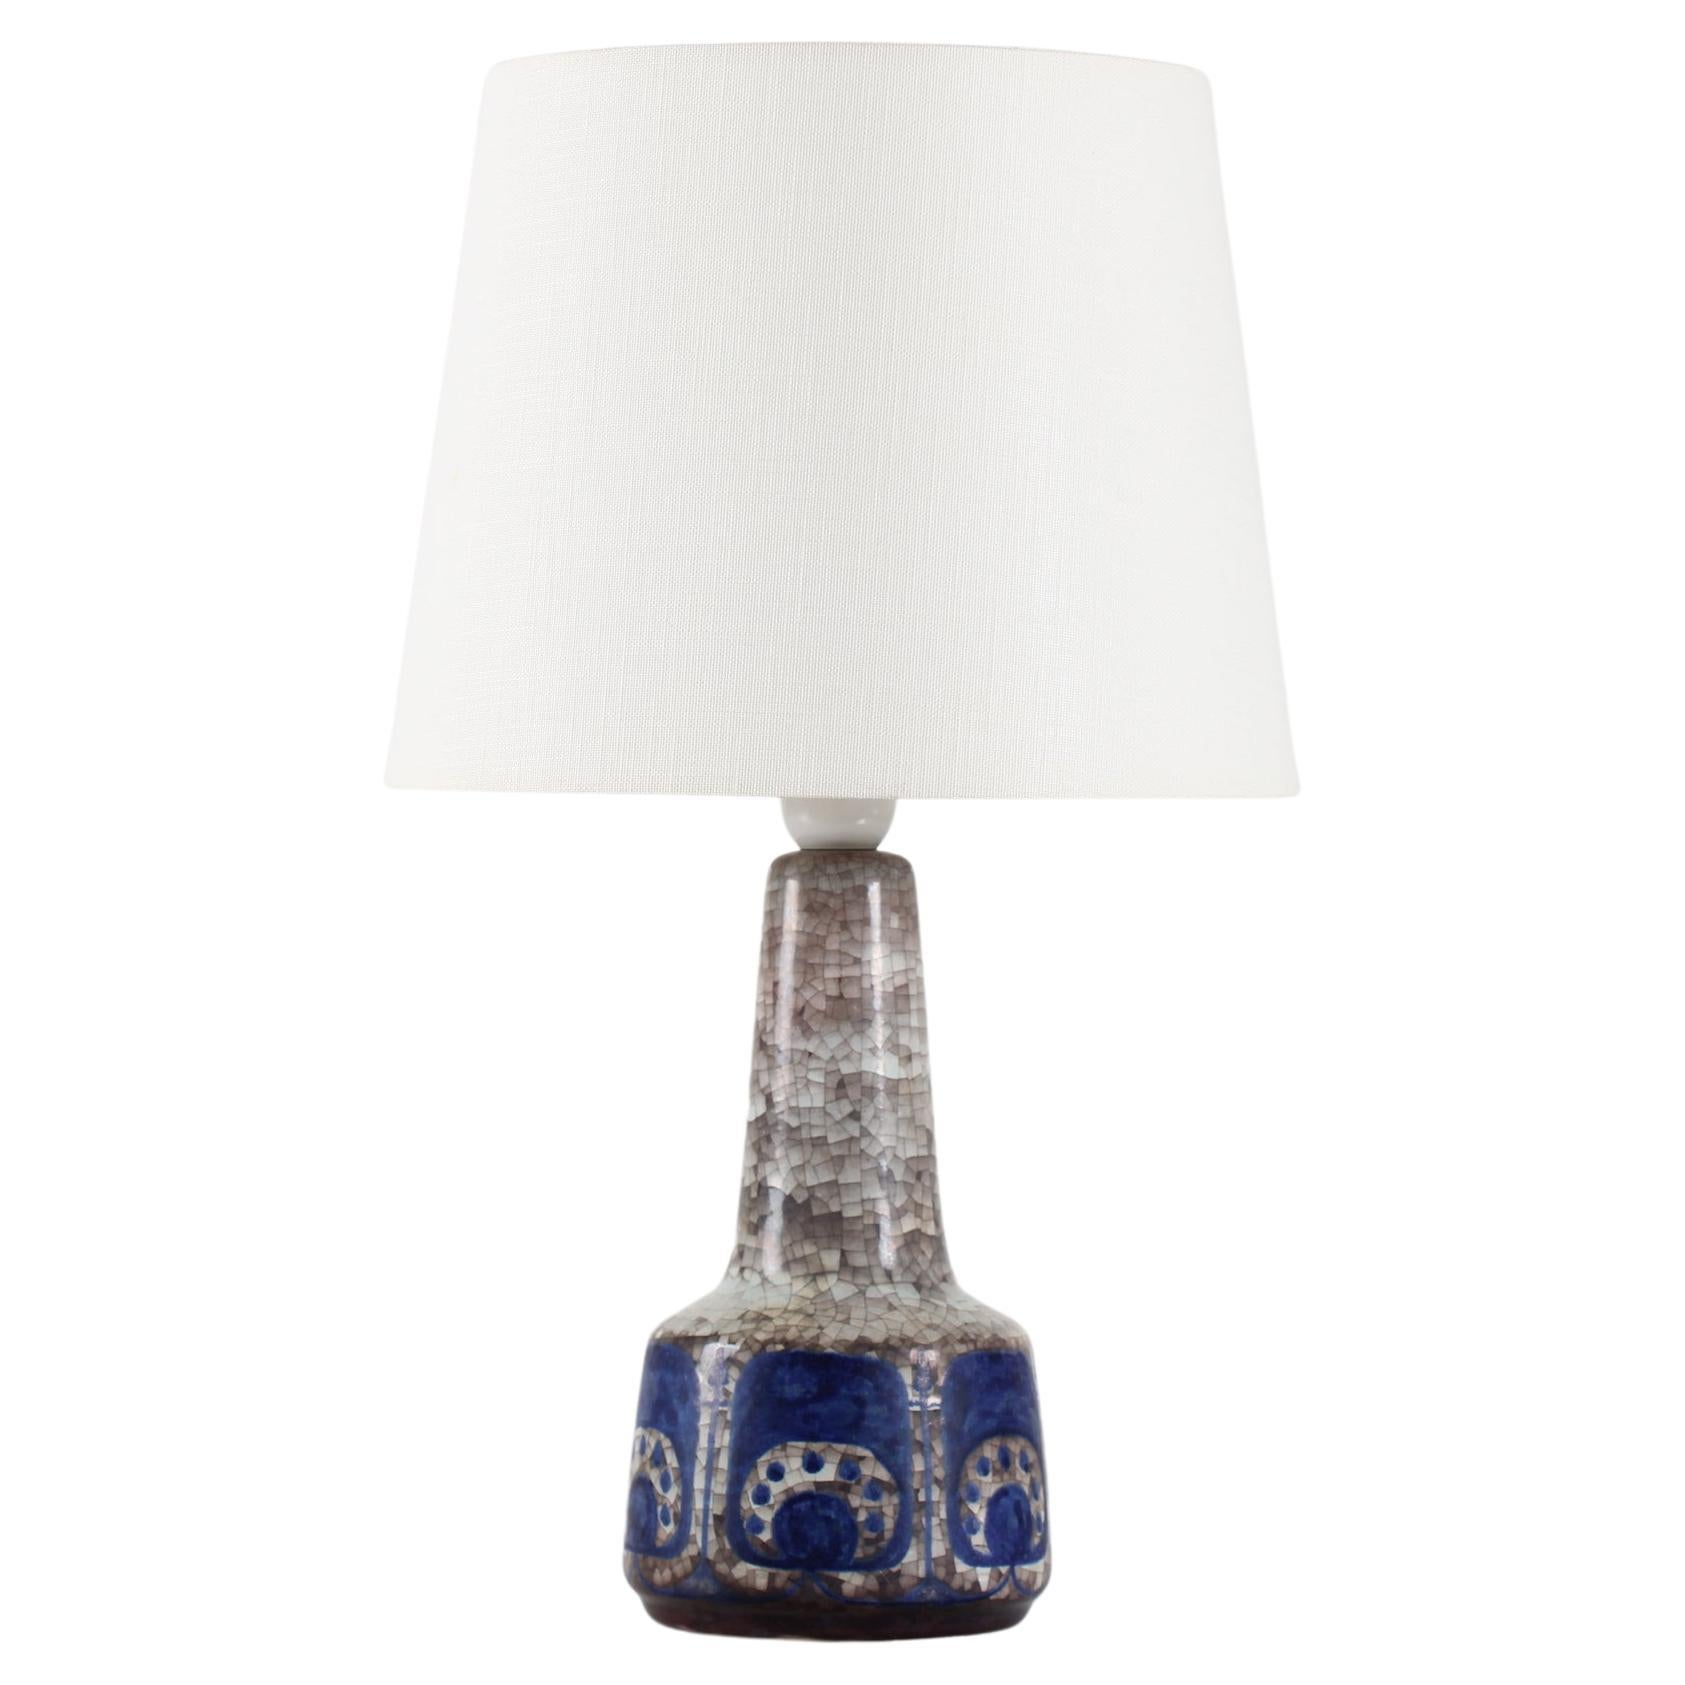 Medium Table Lamp by Marianne Starck for Michael Andersen Blue Persia Glaze 1960 For Sale